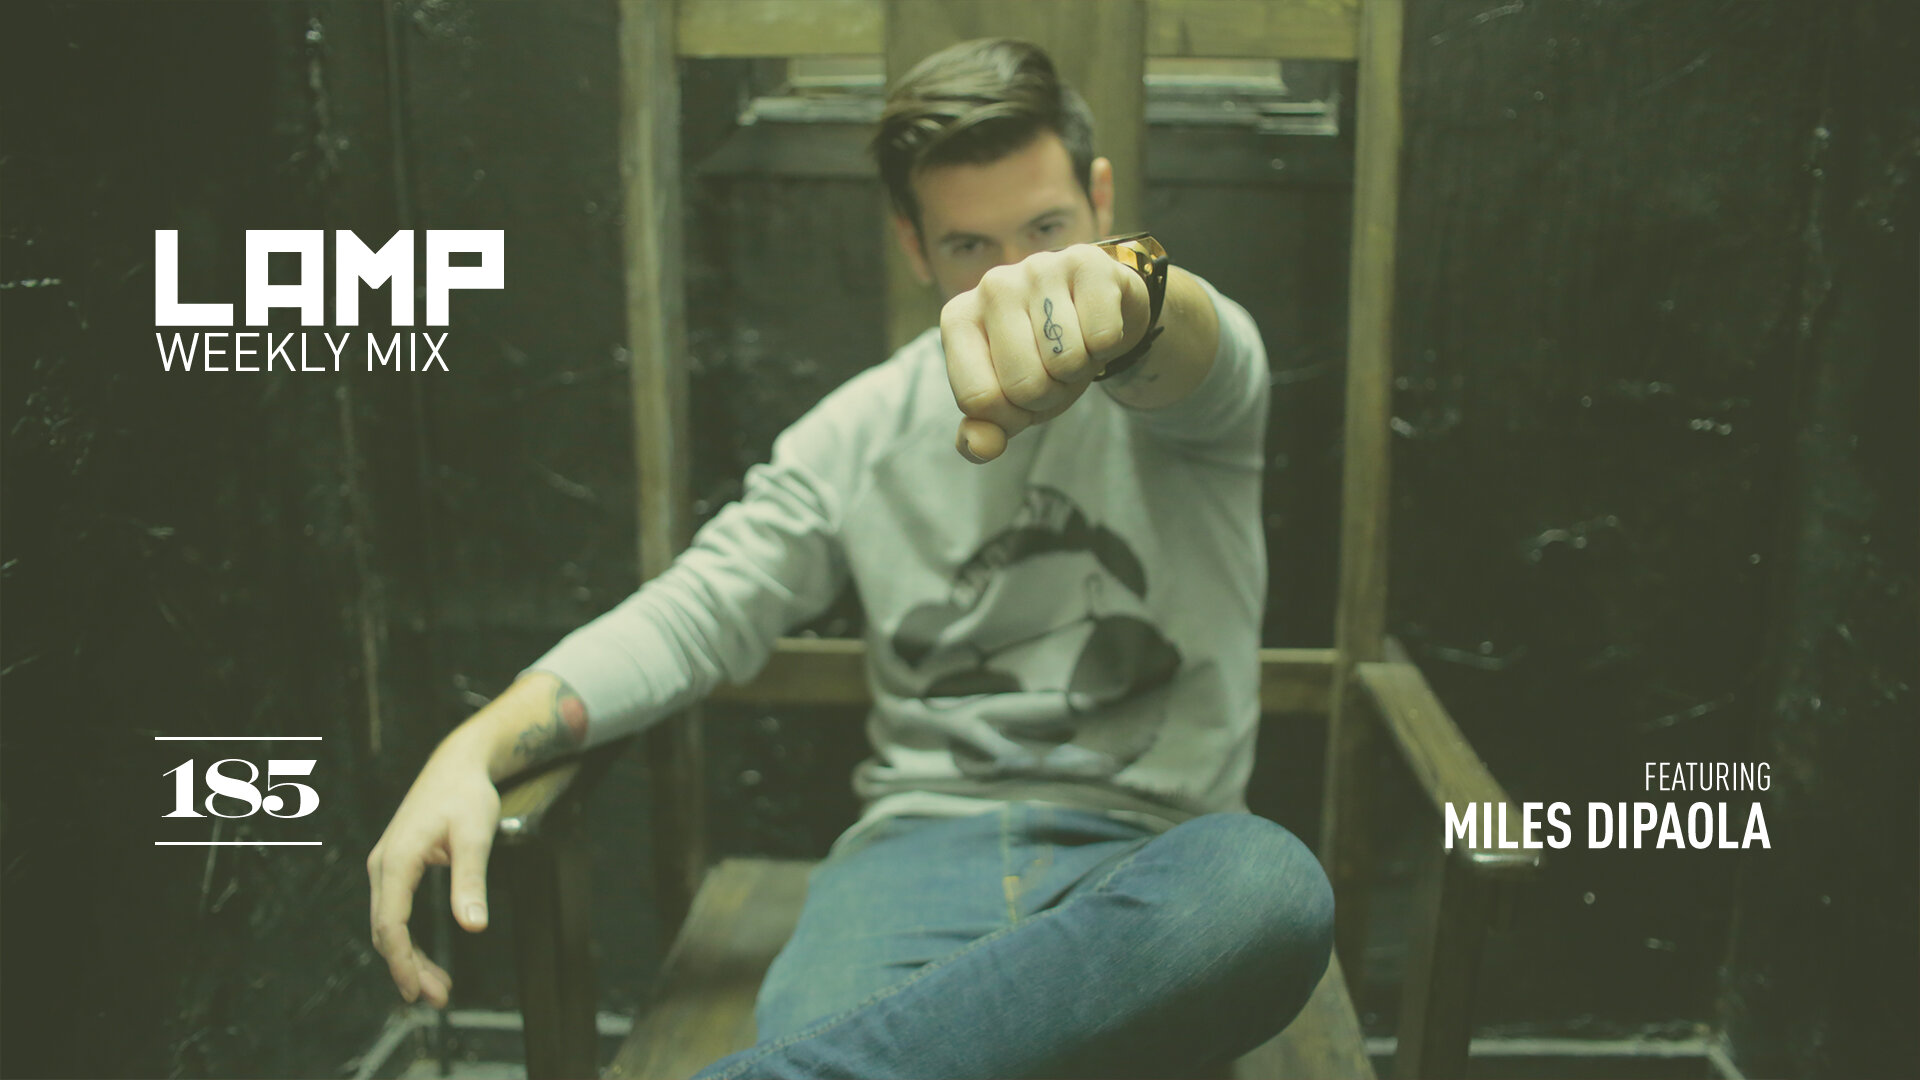 LAMP Weekly Mix #185 feat. Miles DiPaola